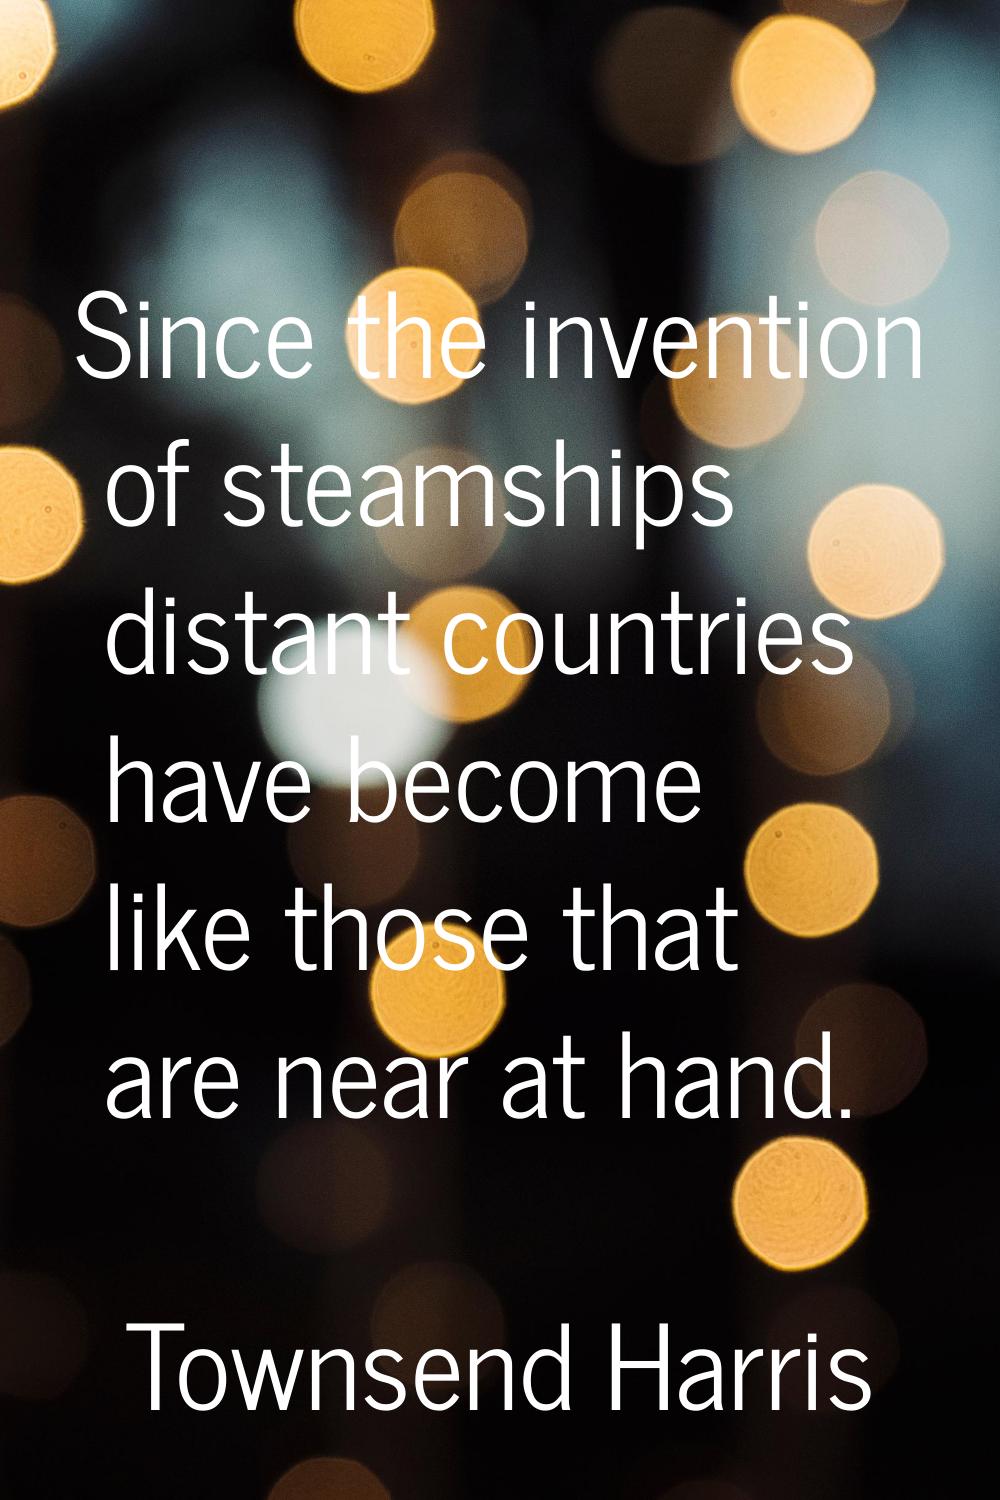 Since the invention of steamships distant countries have become like those that are near at hand.